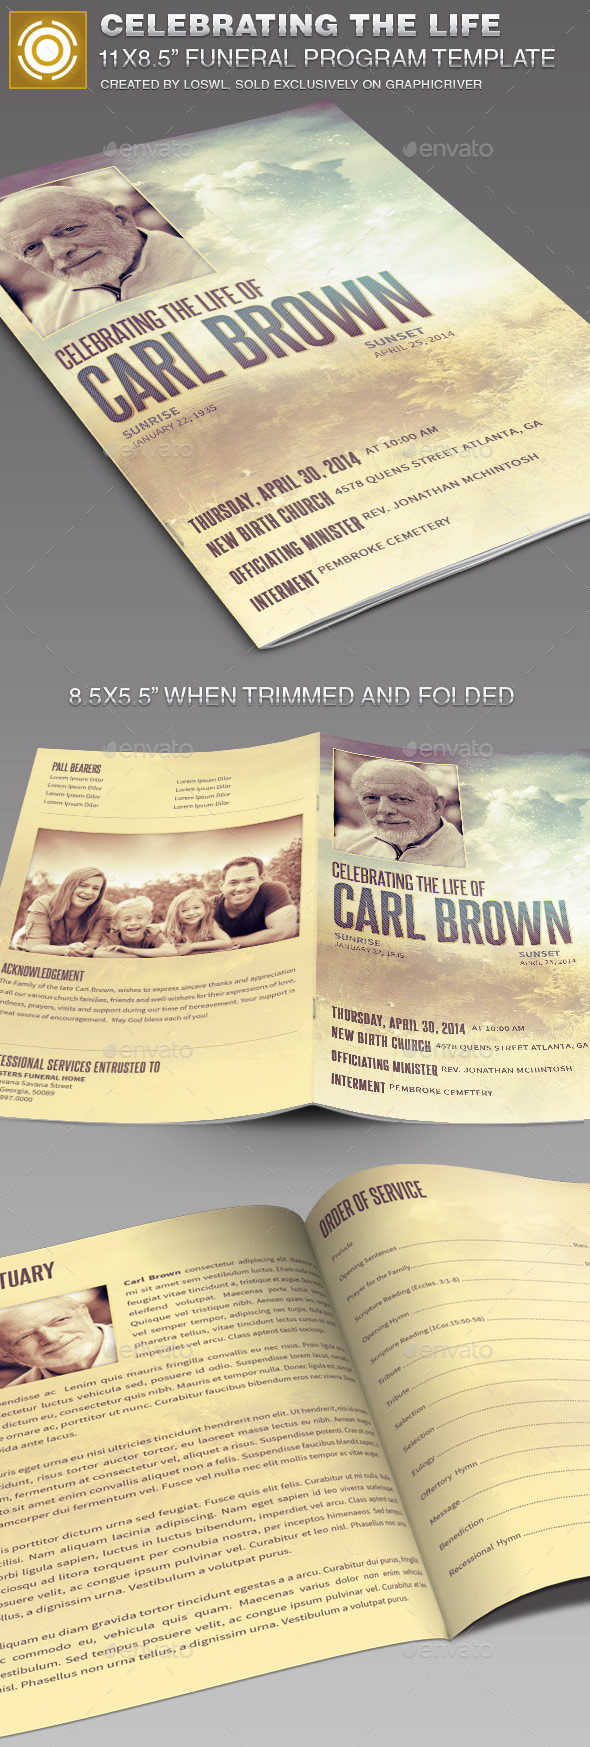 Celebration Of Life Program Template With Roses Design - Download Now!